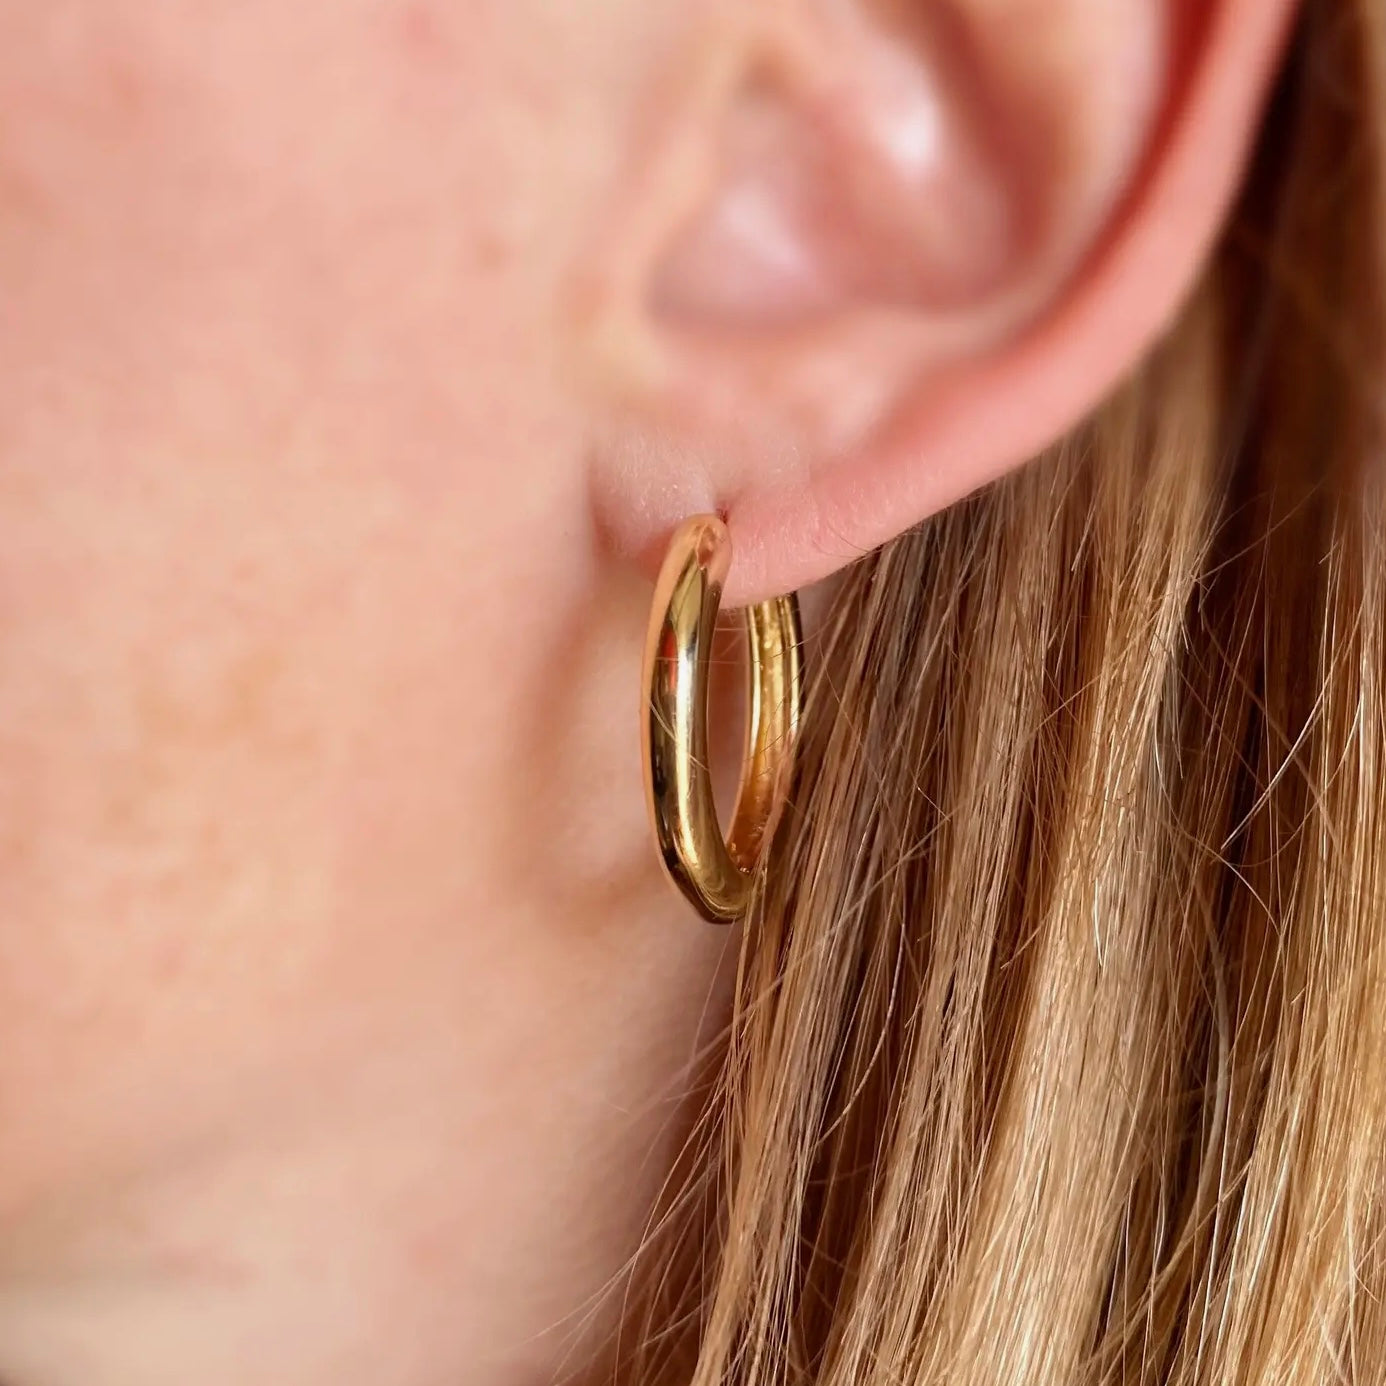 chunky-hoop-earrings-gold-filled-polished-clicker-